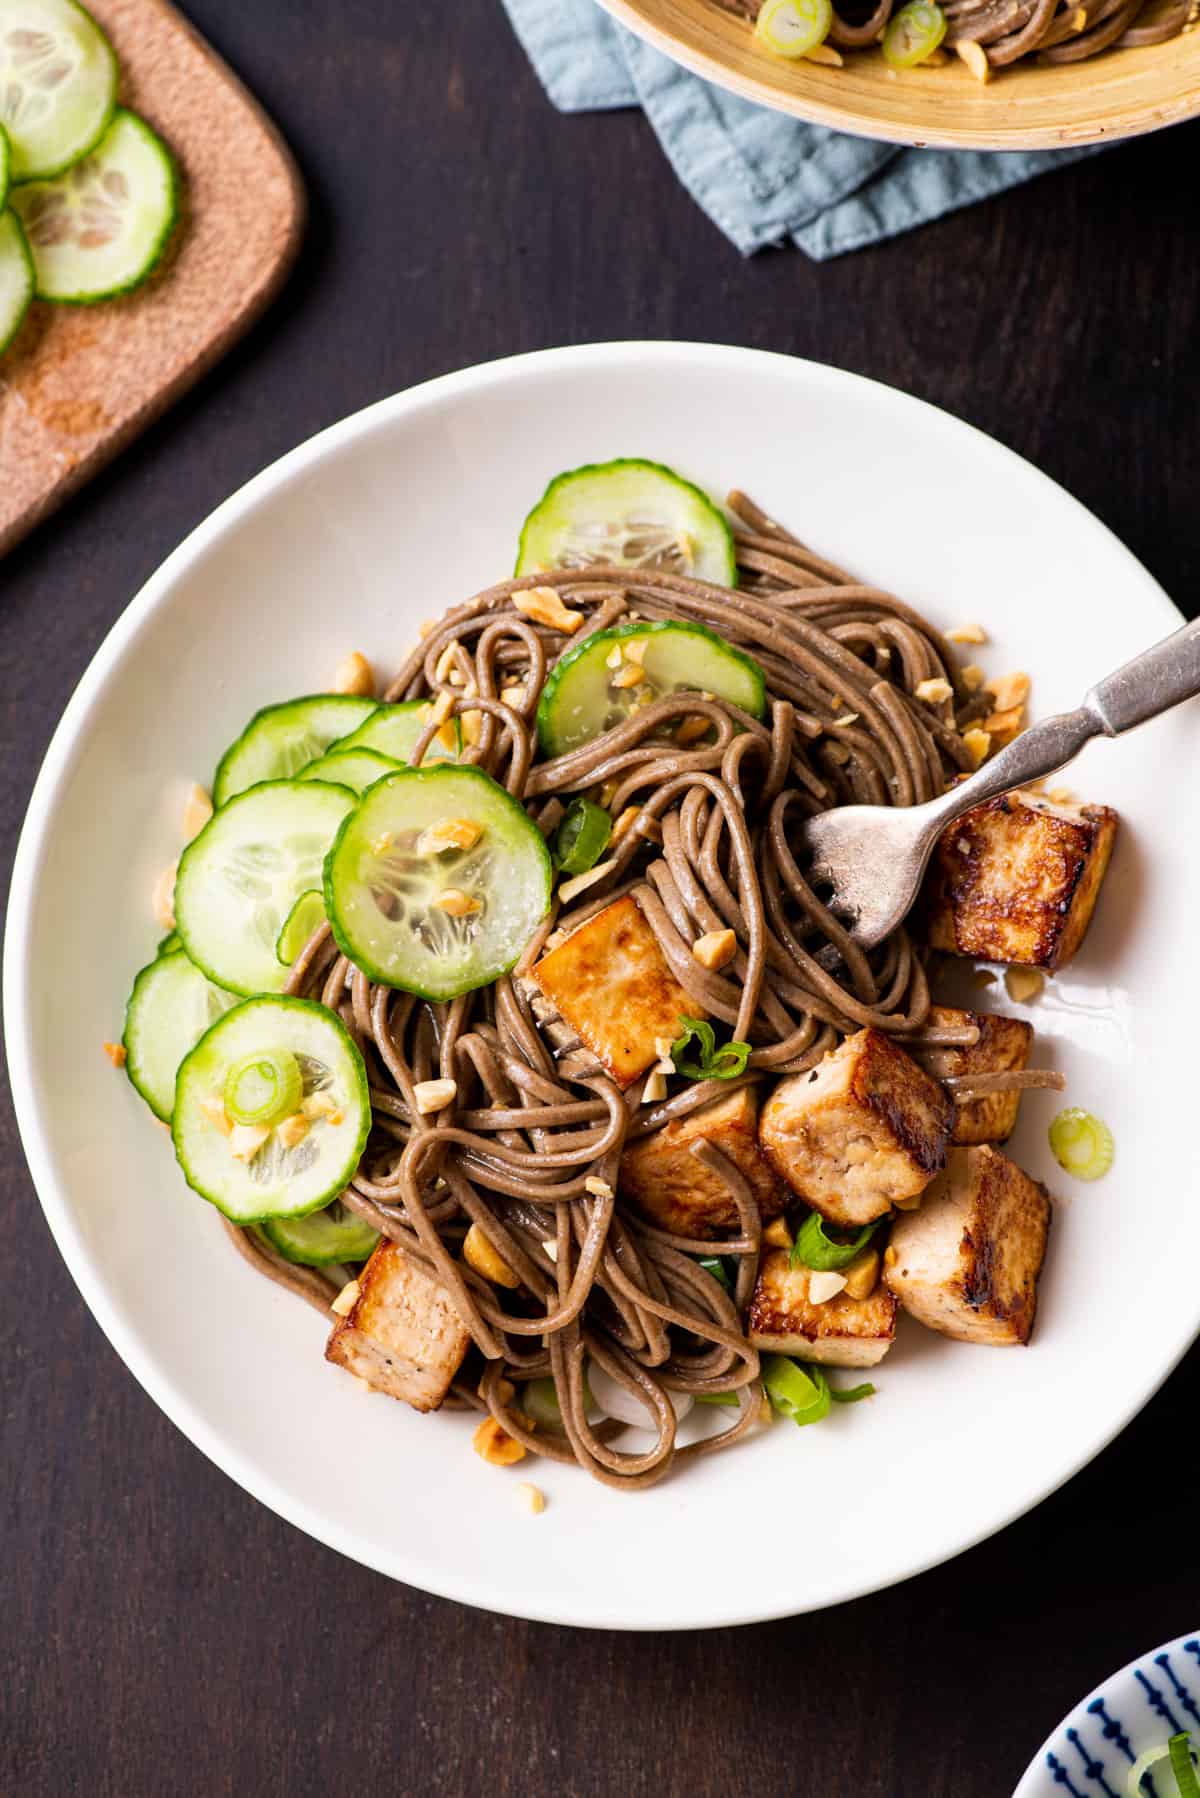 Soba noodle bowl with tofu, cucumbers, and peanuts on a dark wooden table.